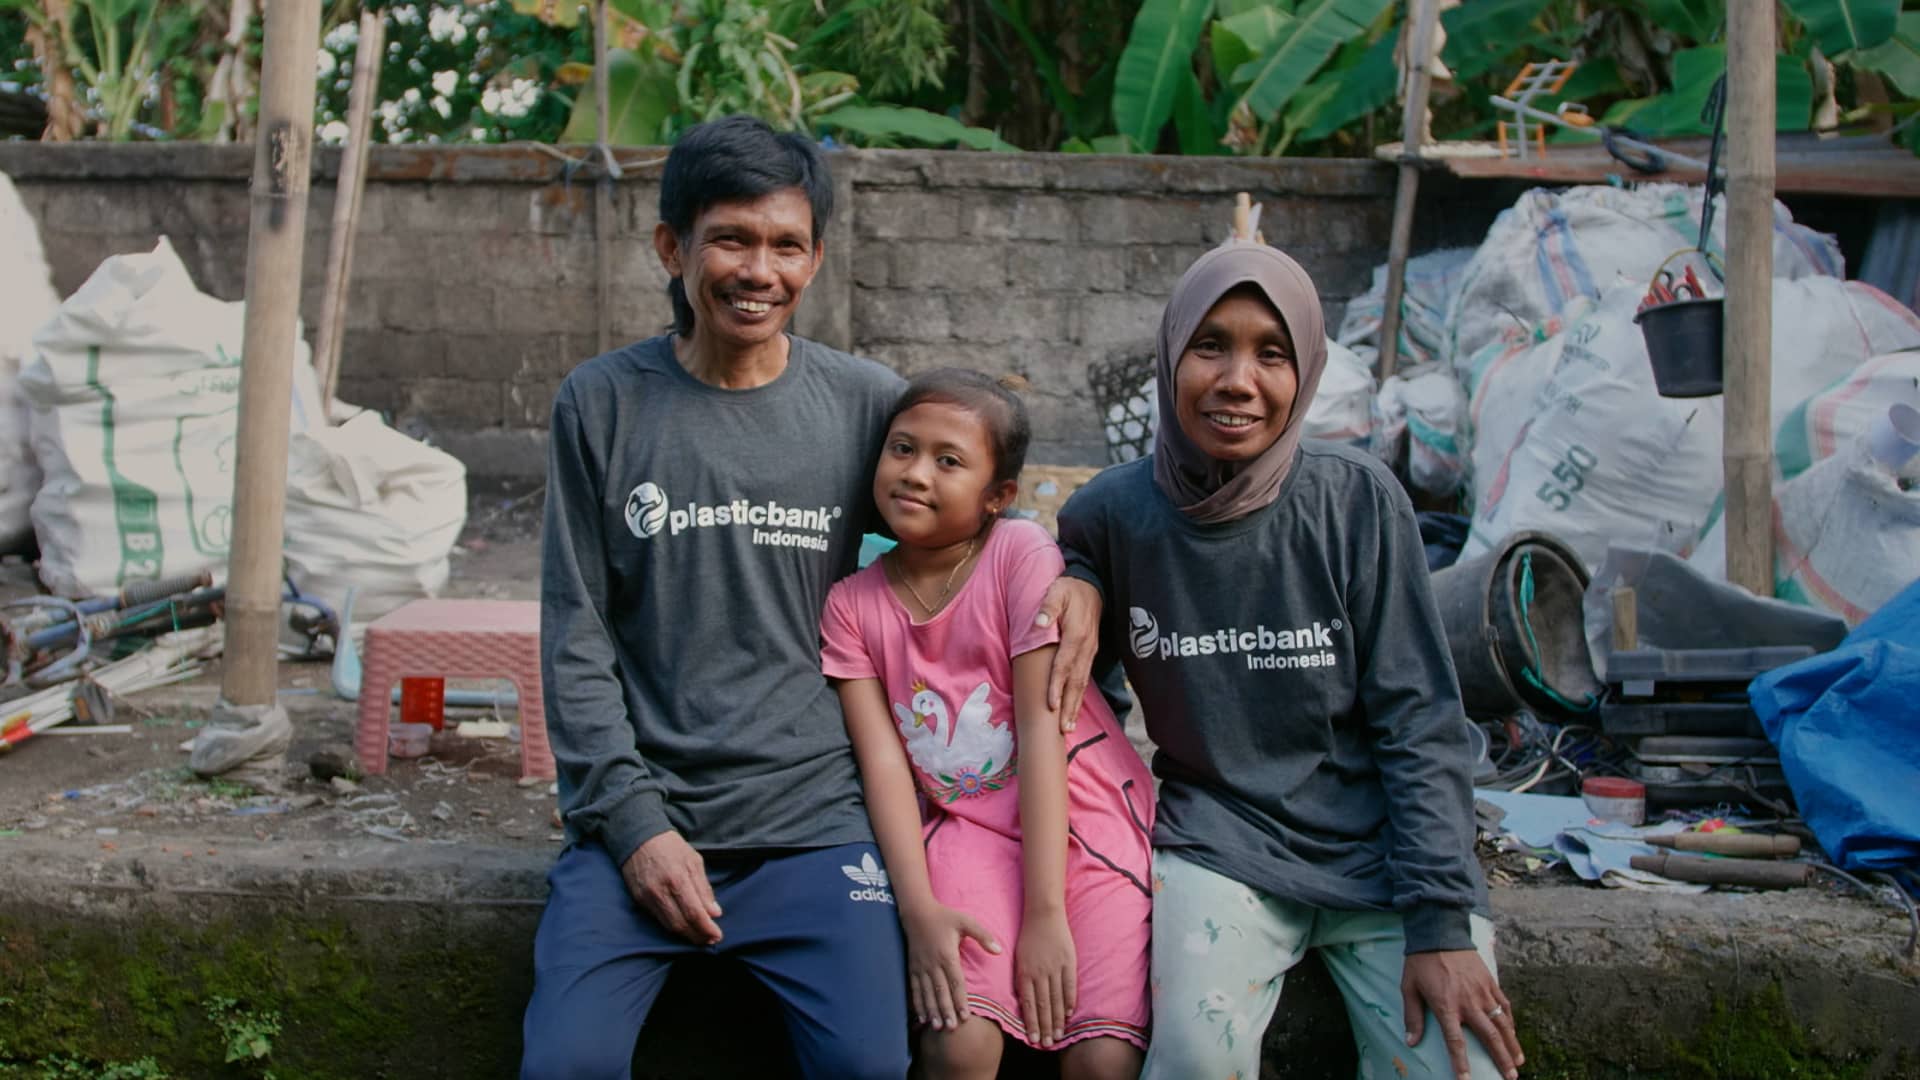 Asis Wijayanto and his wife Atmawati support themselves and their daughter by collecting plastic with Plastic Bank. They live in Bali, Indonesia.